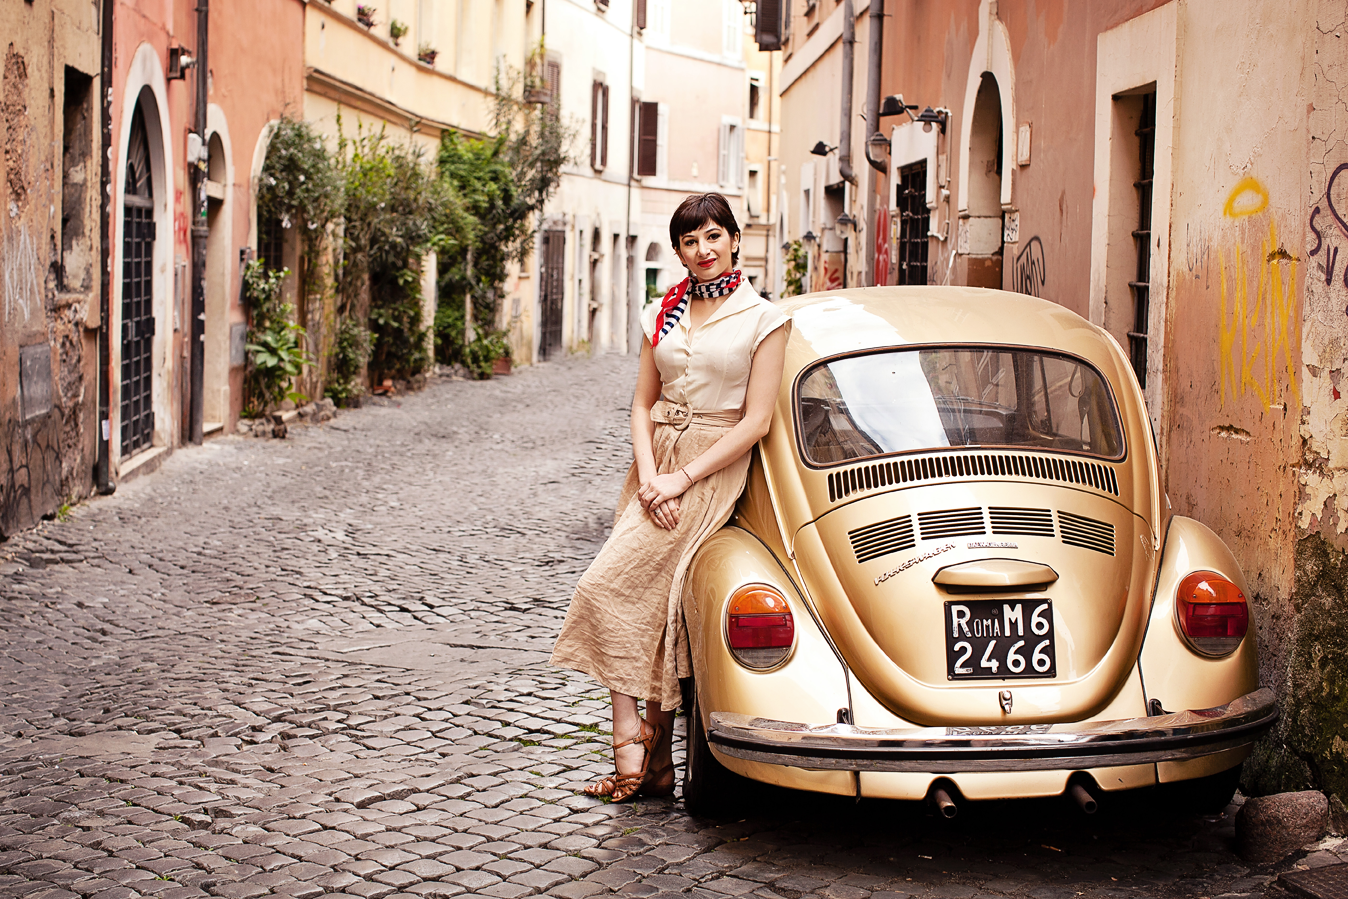 Honeymoon, vacation, family, engagement, maternity, love story individual and solo photoshoots in Rome, Italy by photographer Tricia Anne Photography | Rome Photographer, vacation, tripadvisor, instagram, fun, married, love, story, photography, session, photoshoot, wedding photographer, vacation photographer, engagement photo, honeymoon photoshoot, rome honeymoon, rome wedding, elopement in Rome, honeymoon photographer rome, Solo Photo shoot, Rome Photography, Photo Shoot Trastevere, Solo trip to Rome, What to do in Rome, Solo traveler, Trastevere, Trastevere solo photo shoot